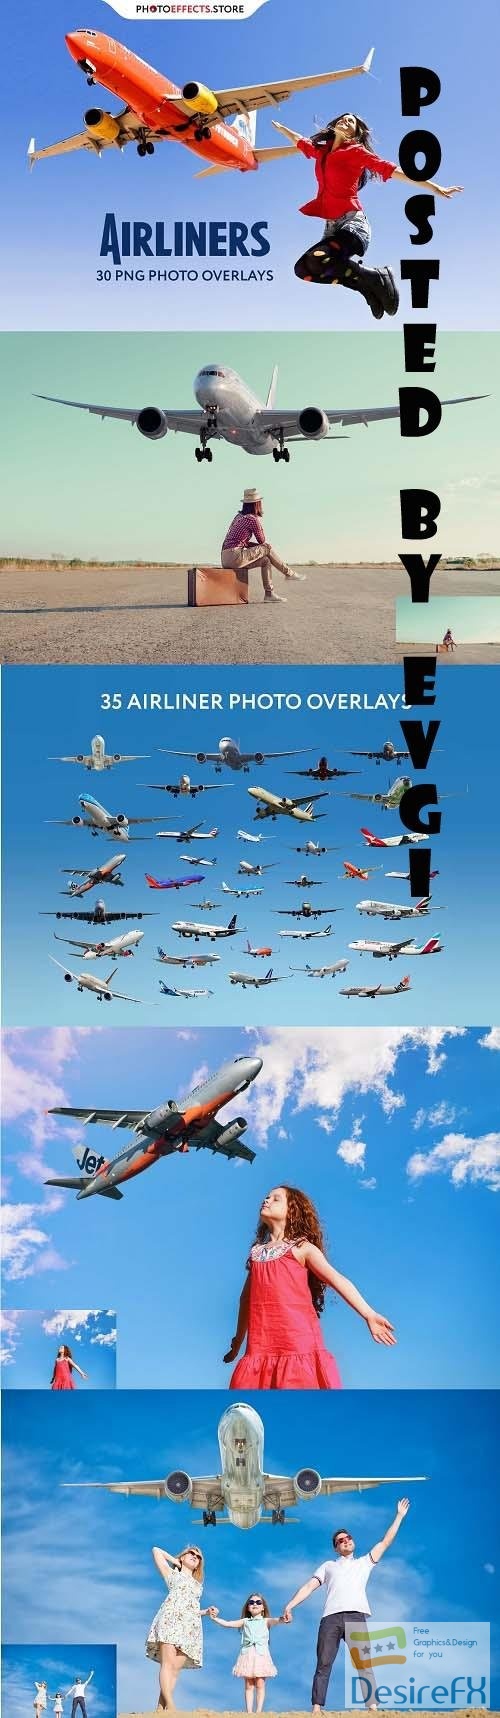 35 Airliners Photo Overlays - 6576238